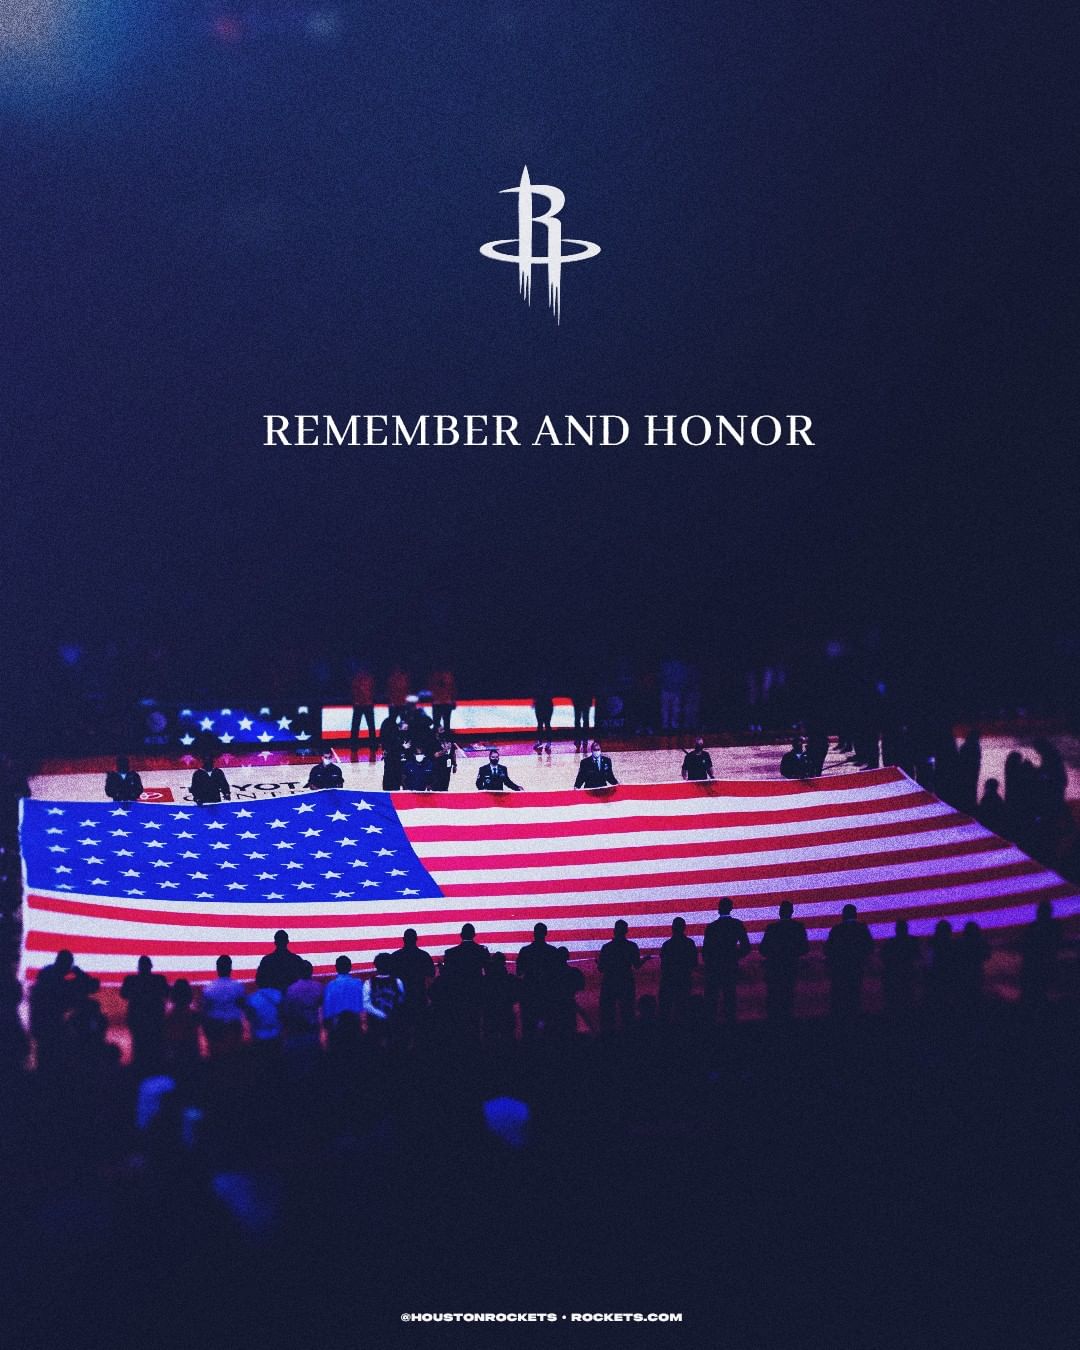 We remember and honor the heroes who made the ultimate sacrifice for our country...